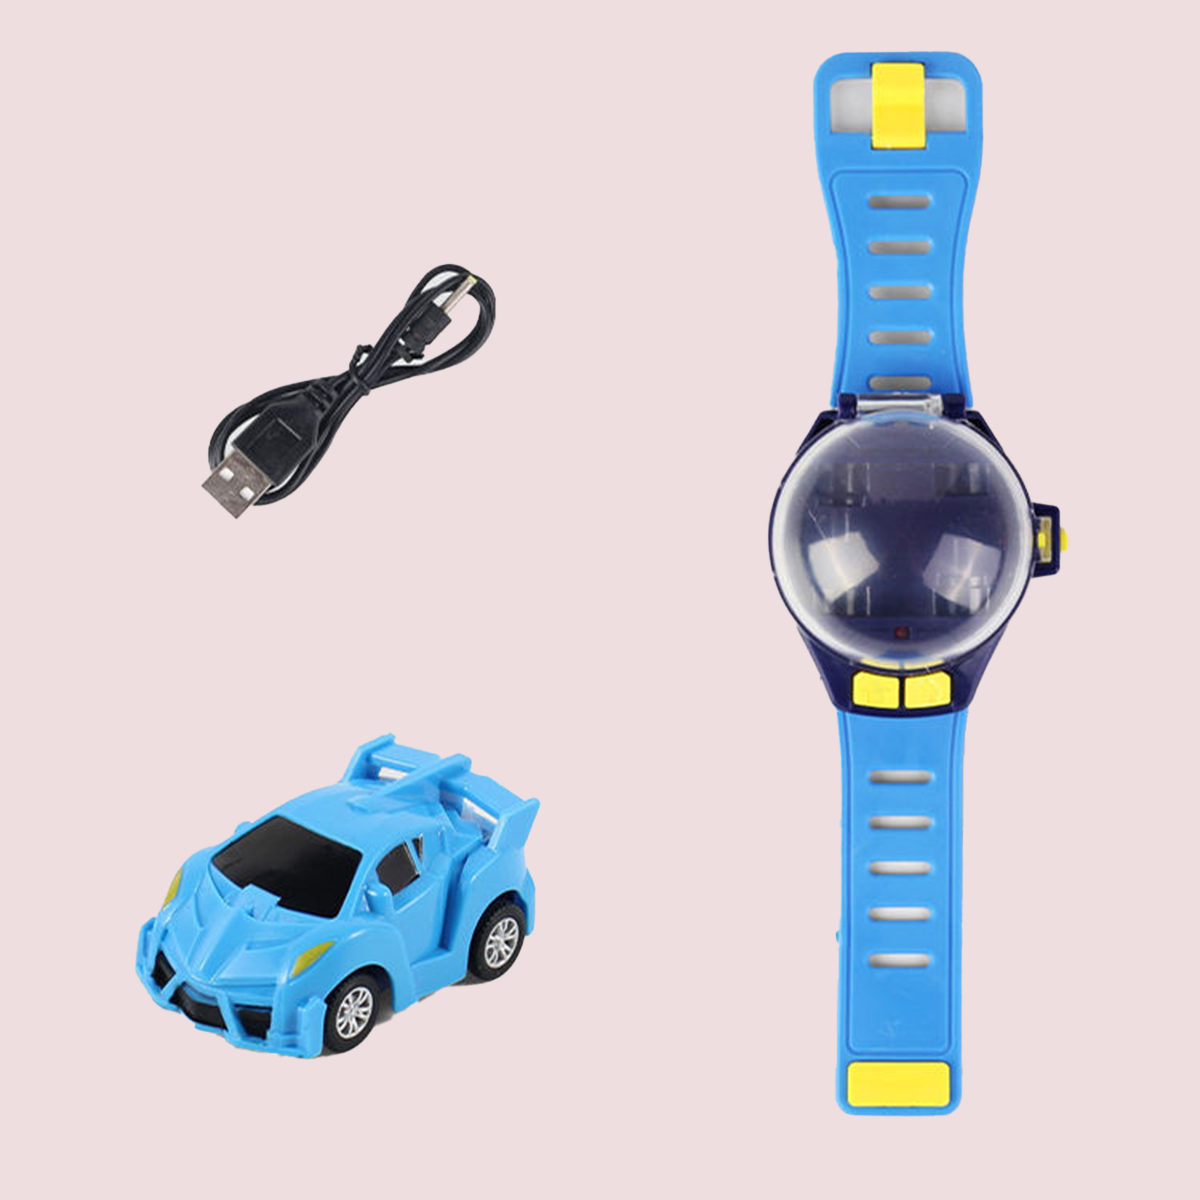 Wrist Watch Remote Controlled Car - Yellow